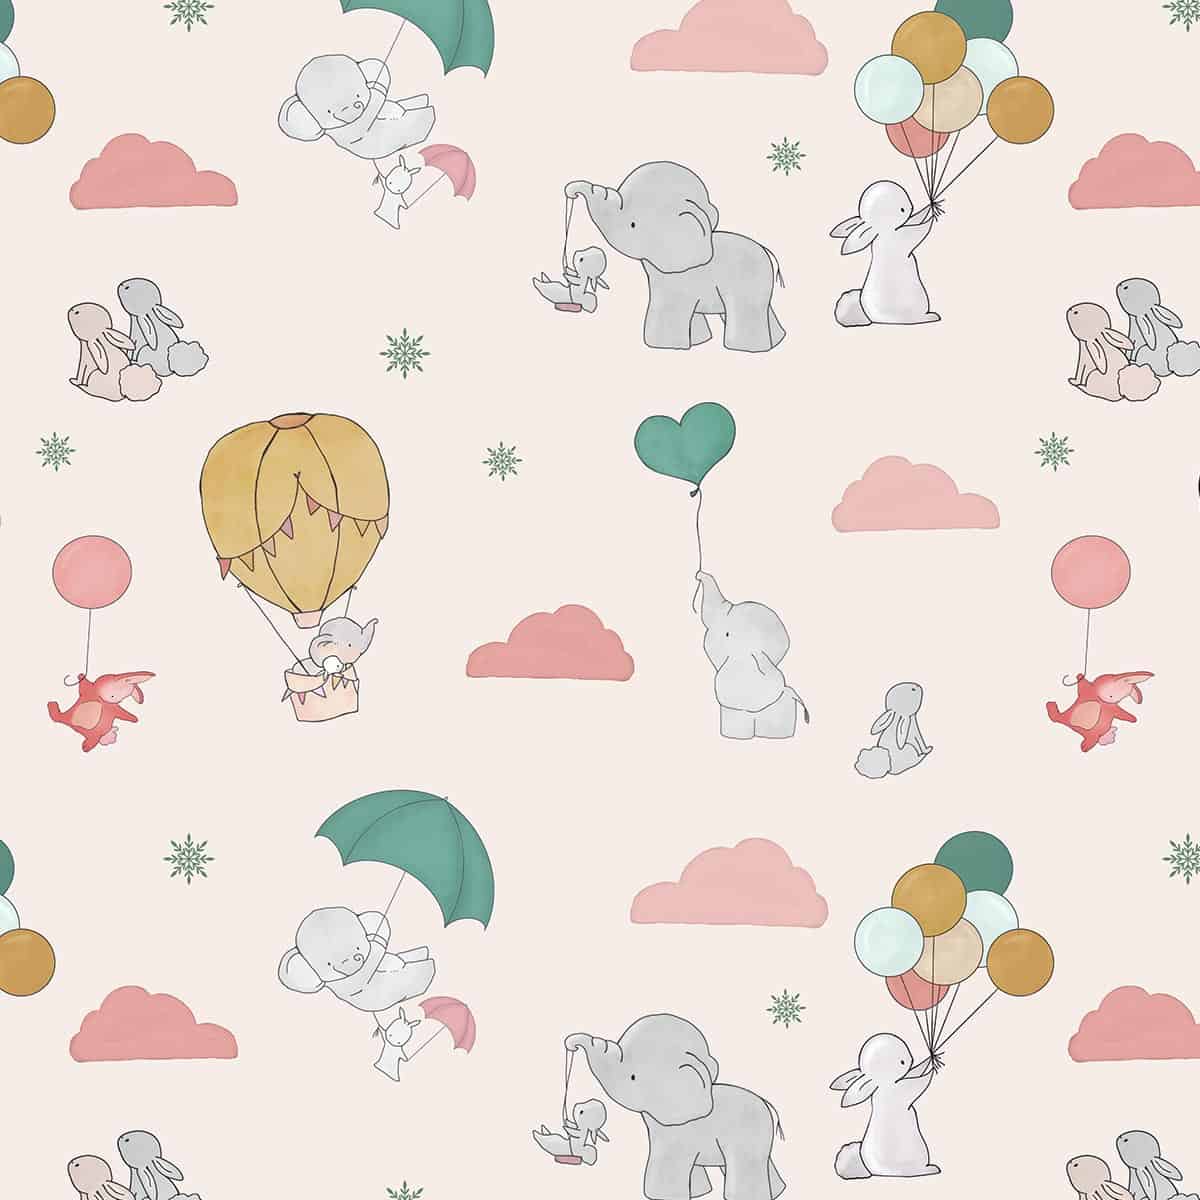 Tiny Trunks and Floppy Ears, Cute Wallpaper for Rooms, Blush